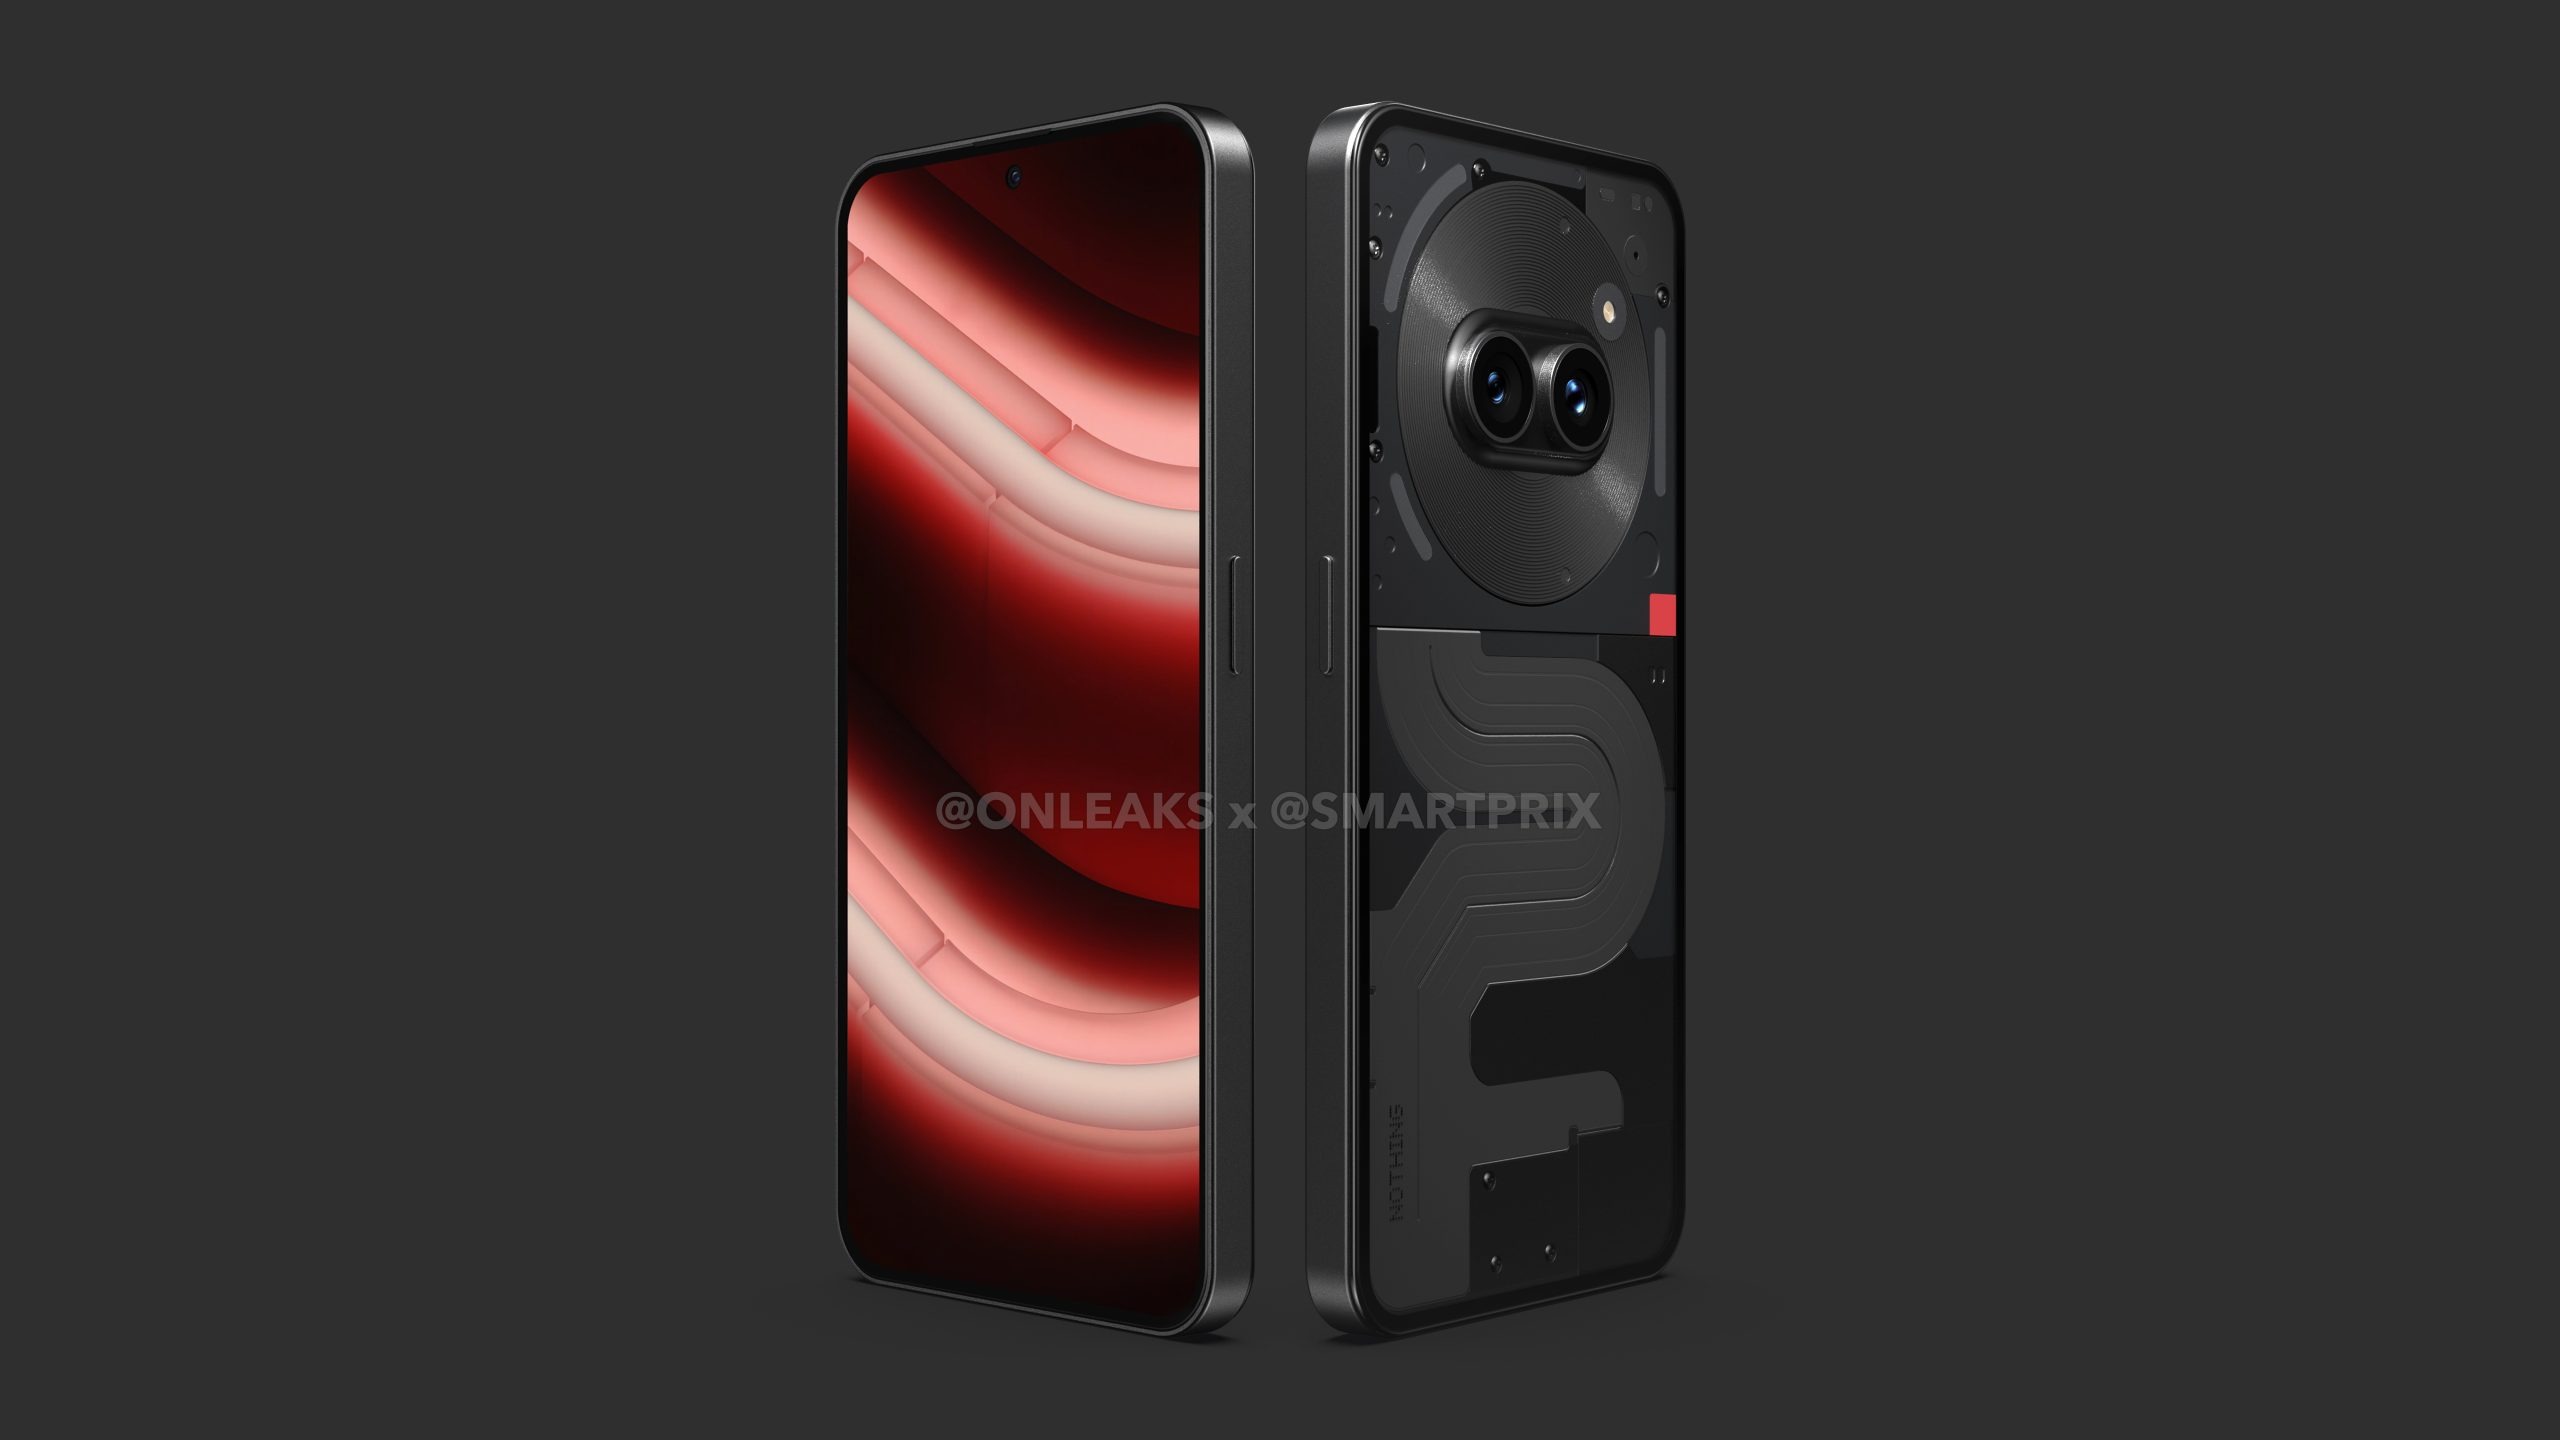 Alleged renders of the Nothing Phone 2a